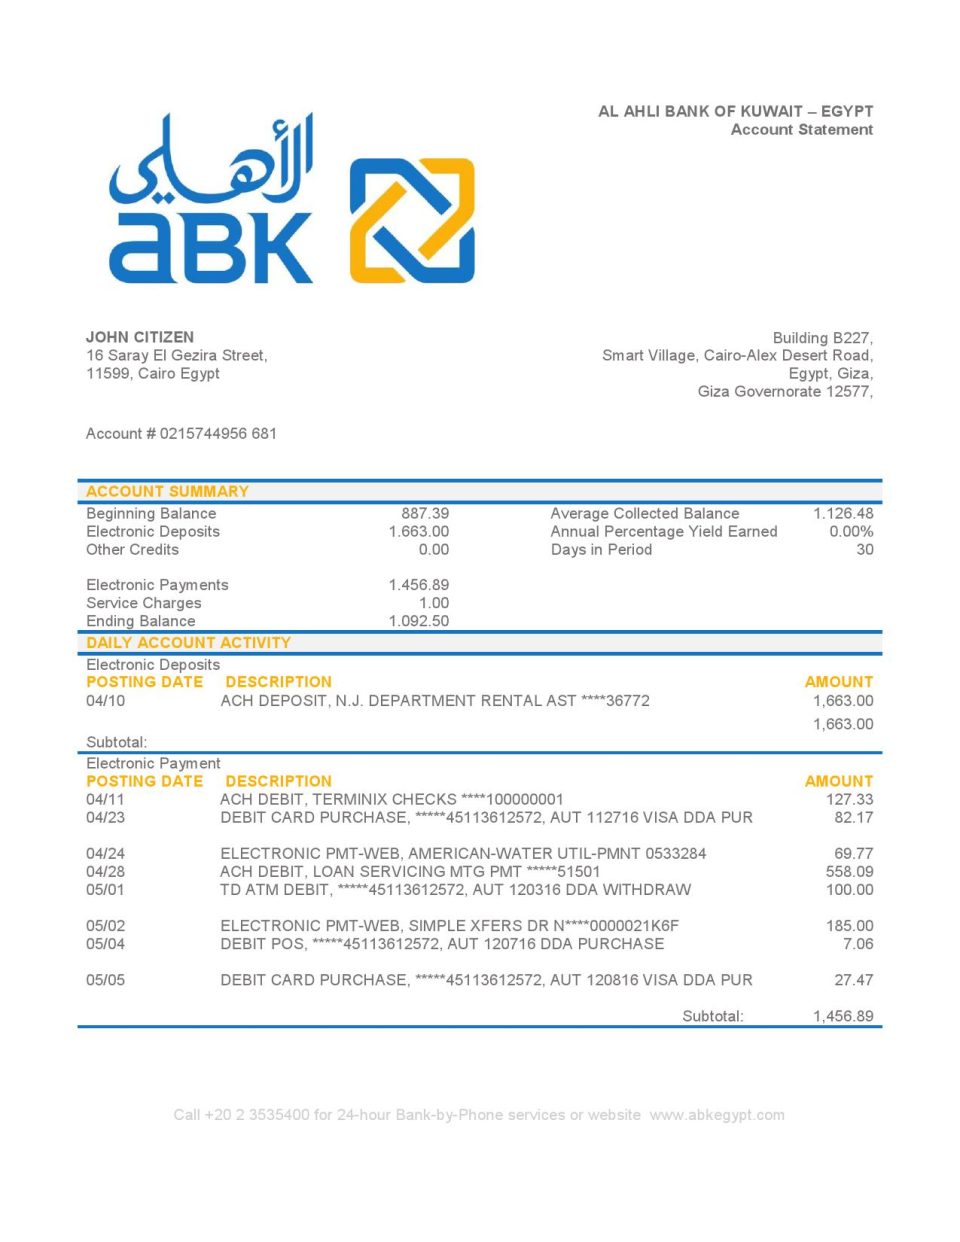 Egypt Al Ahli Bank of Kuwait bank statement easy to fill template in Word and PDF format